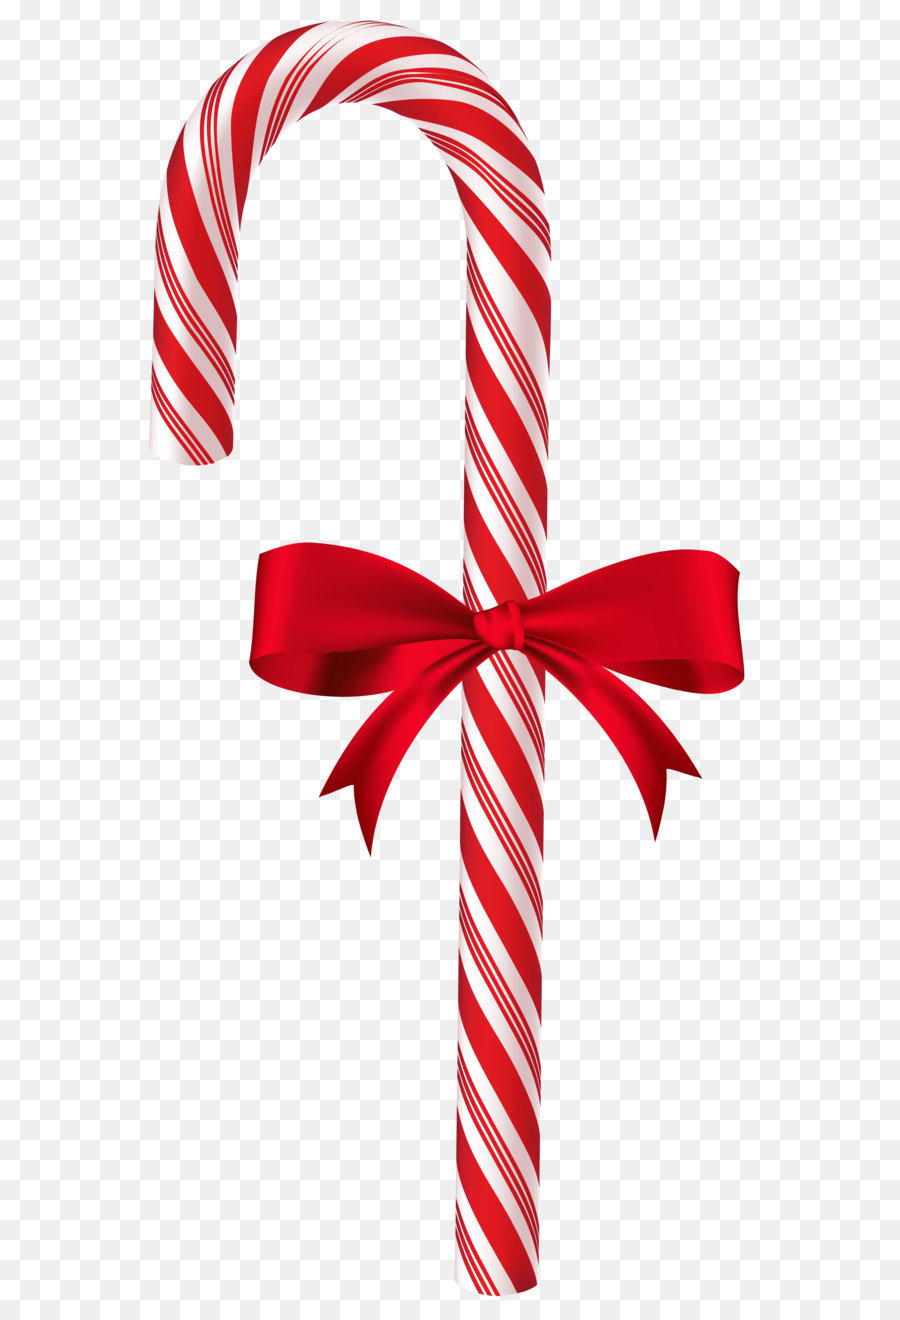 Candy cane Christmas Clip art - Candy Cane with Red Bow PNG Clip Art Image png download - 3775*7600 - Free Transparent Candy Cane png Download.